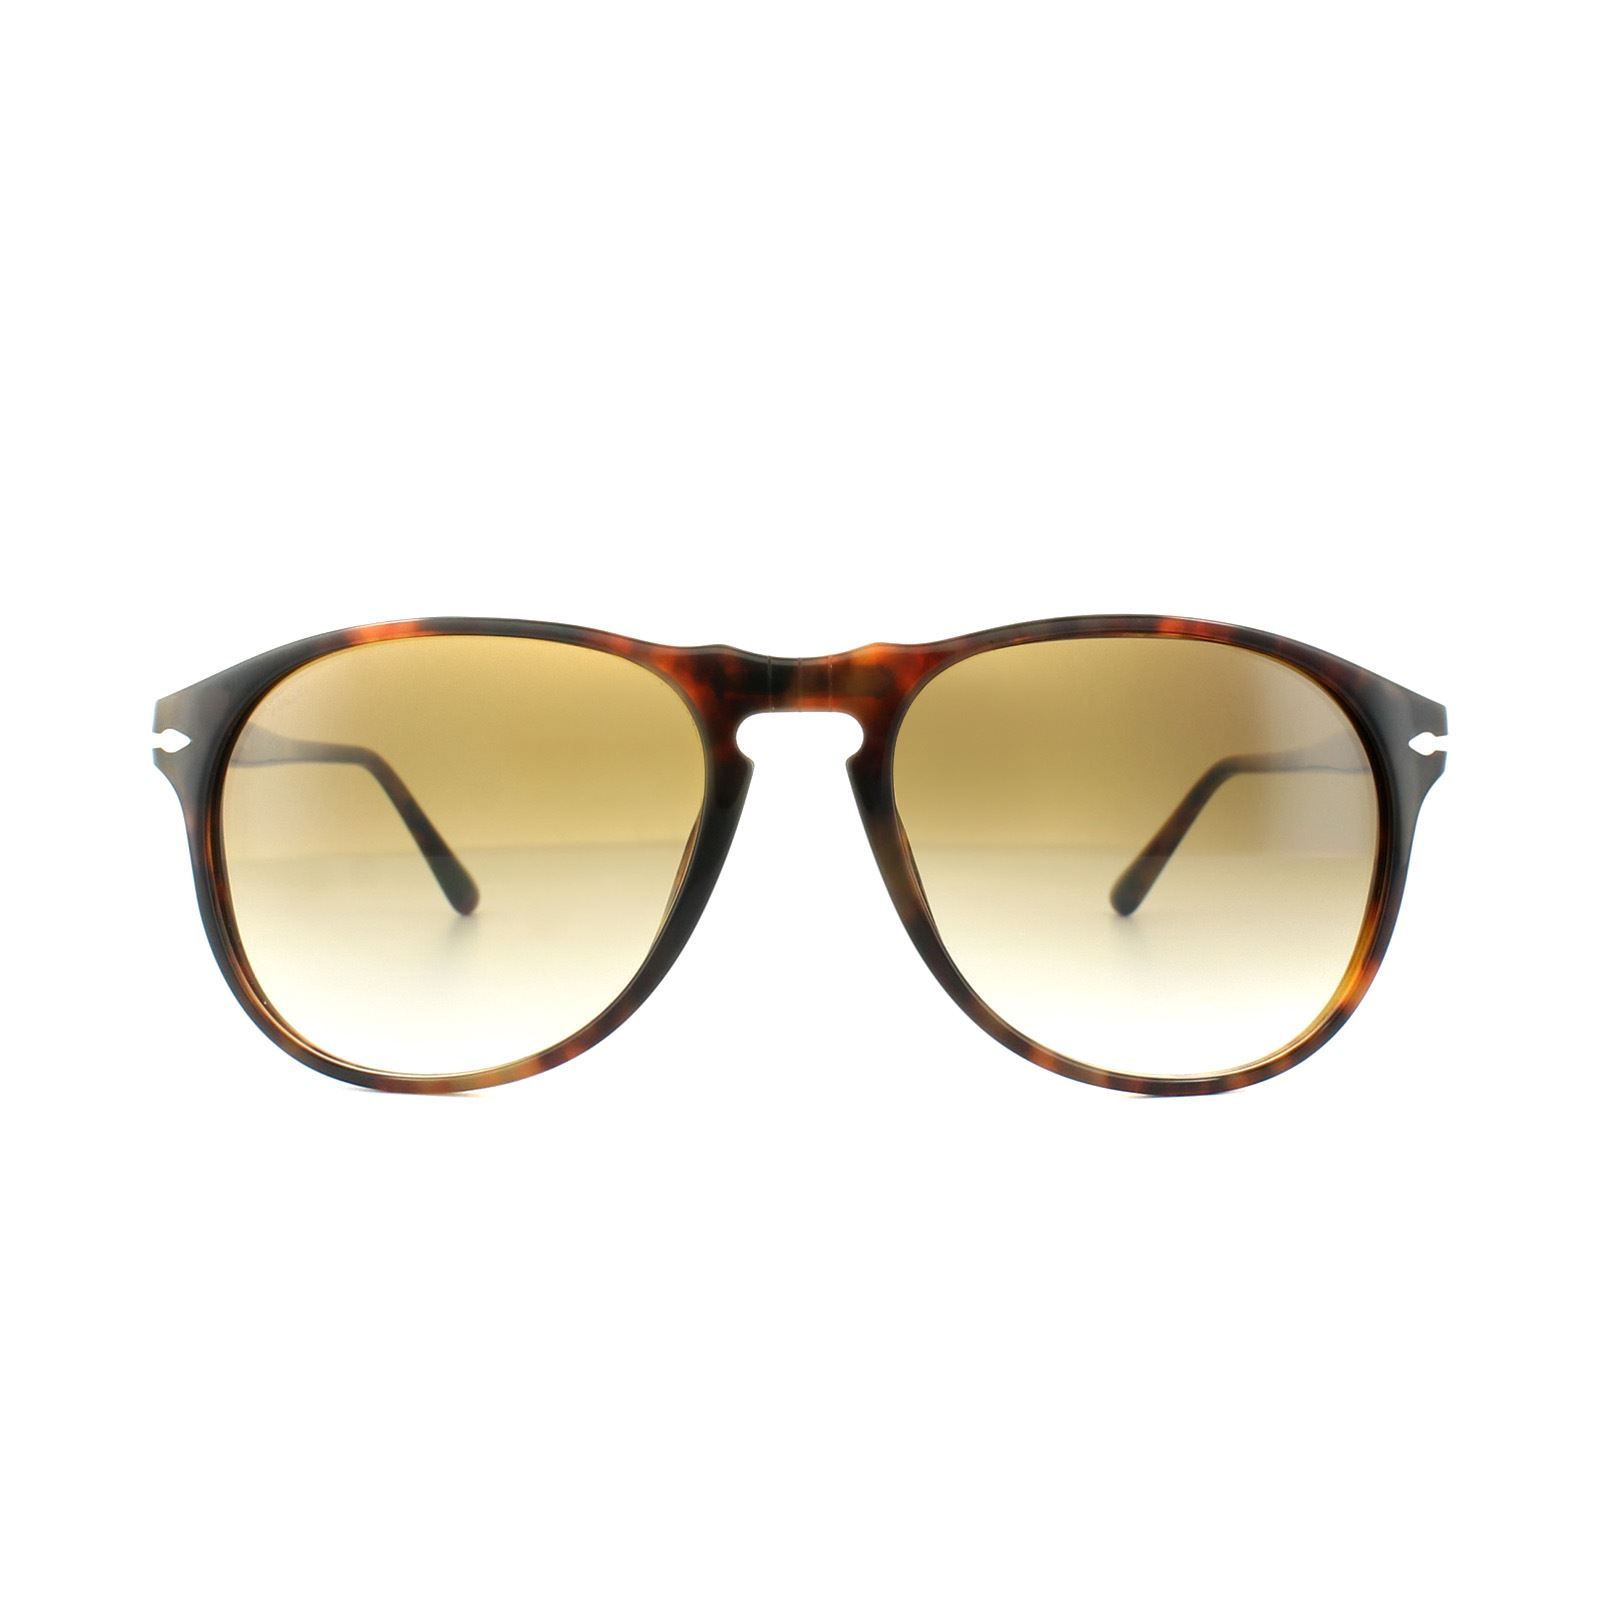 Persol Sunglasses 6649S 108/51 Caffe Brown Brown Gradient is a another updated version of the classic 649 model with a meflecto flex system on the hinge and at the bridge for a very flexible, thus comfortable fit, perfect for all day wear.